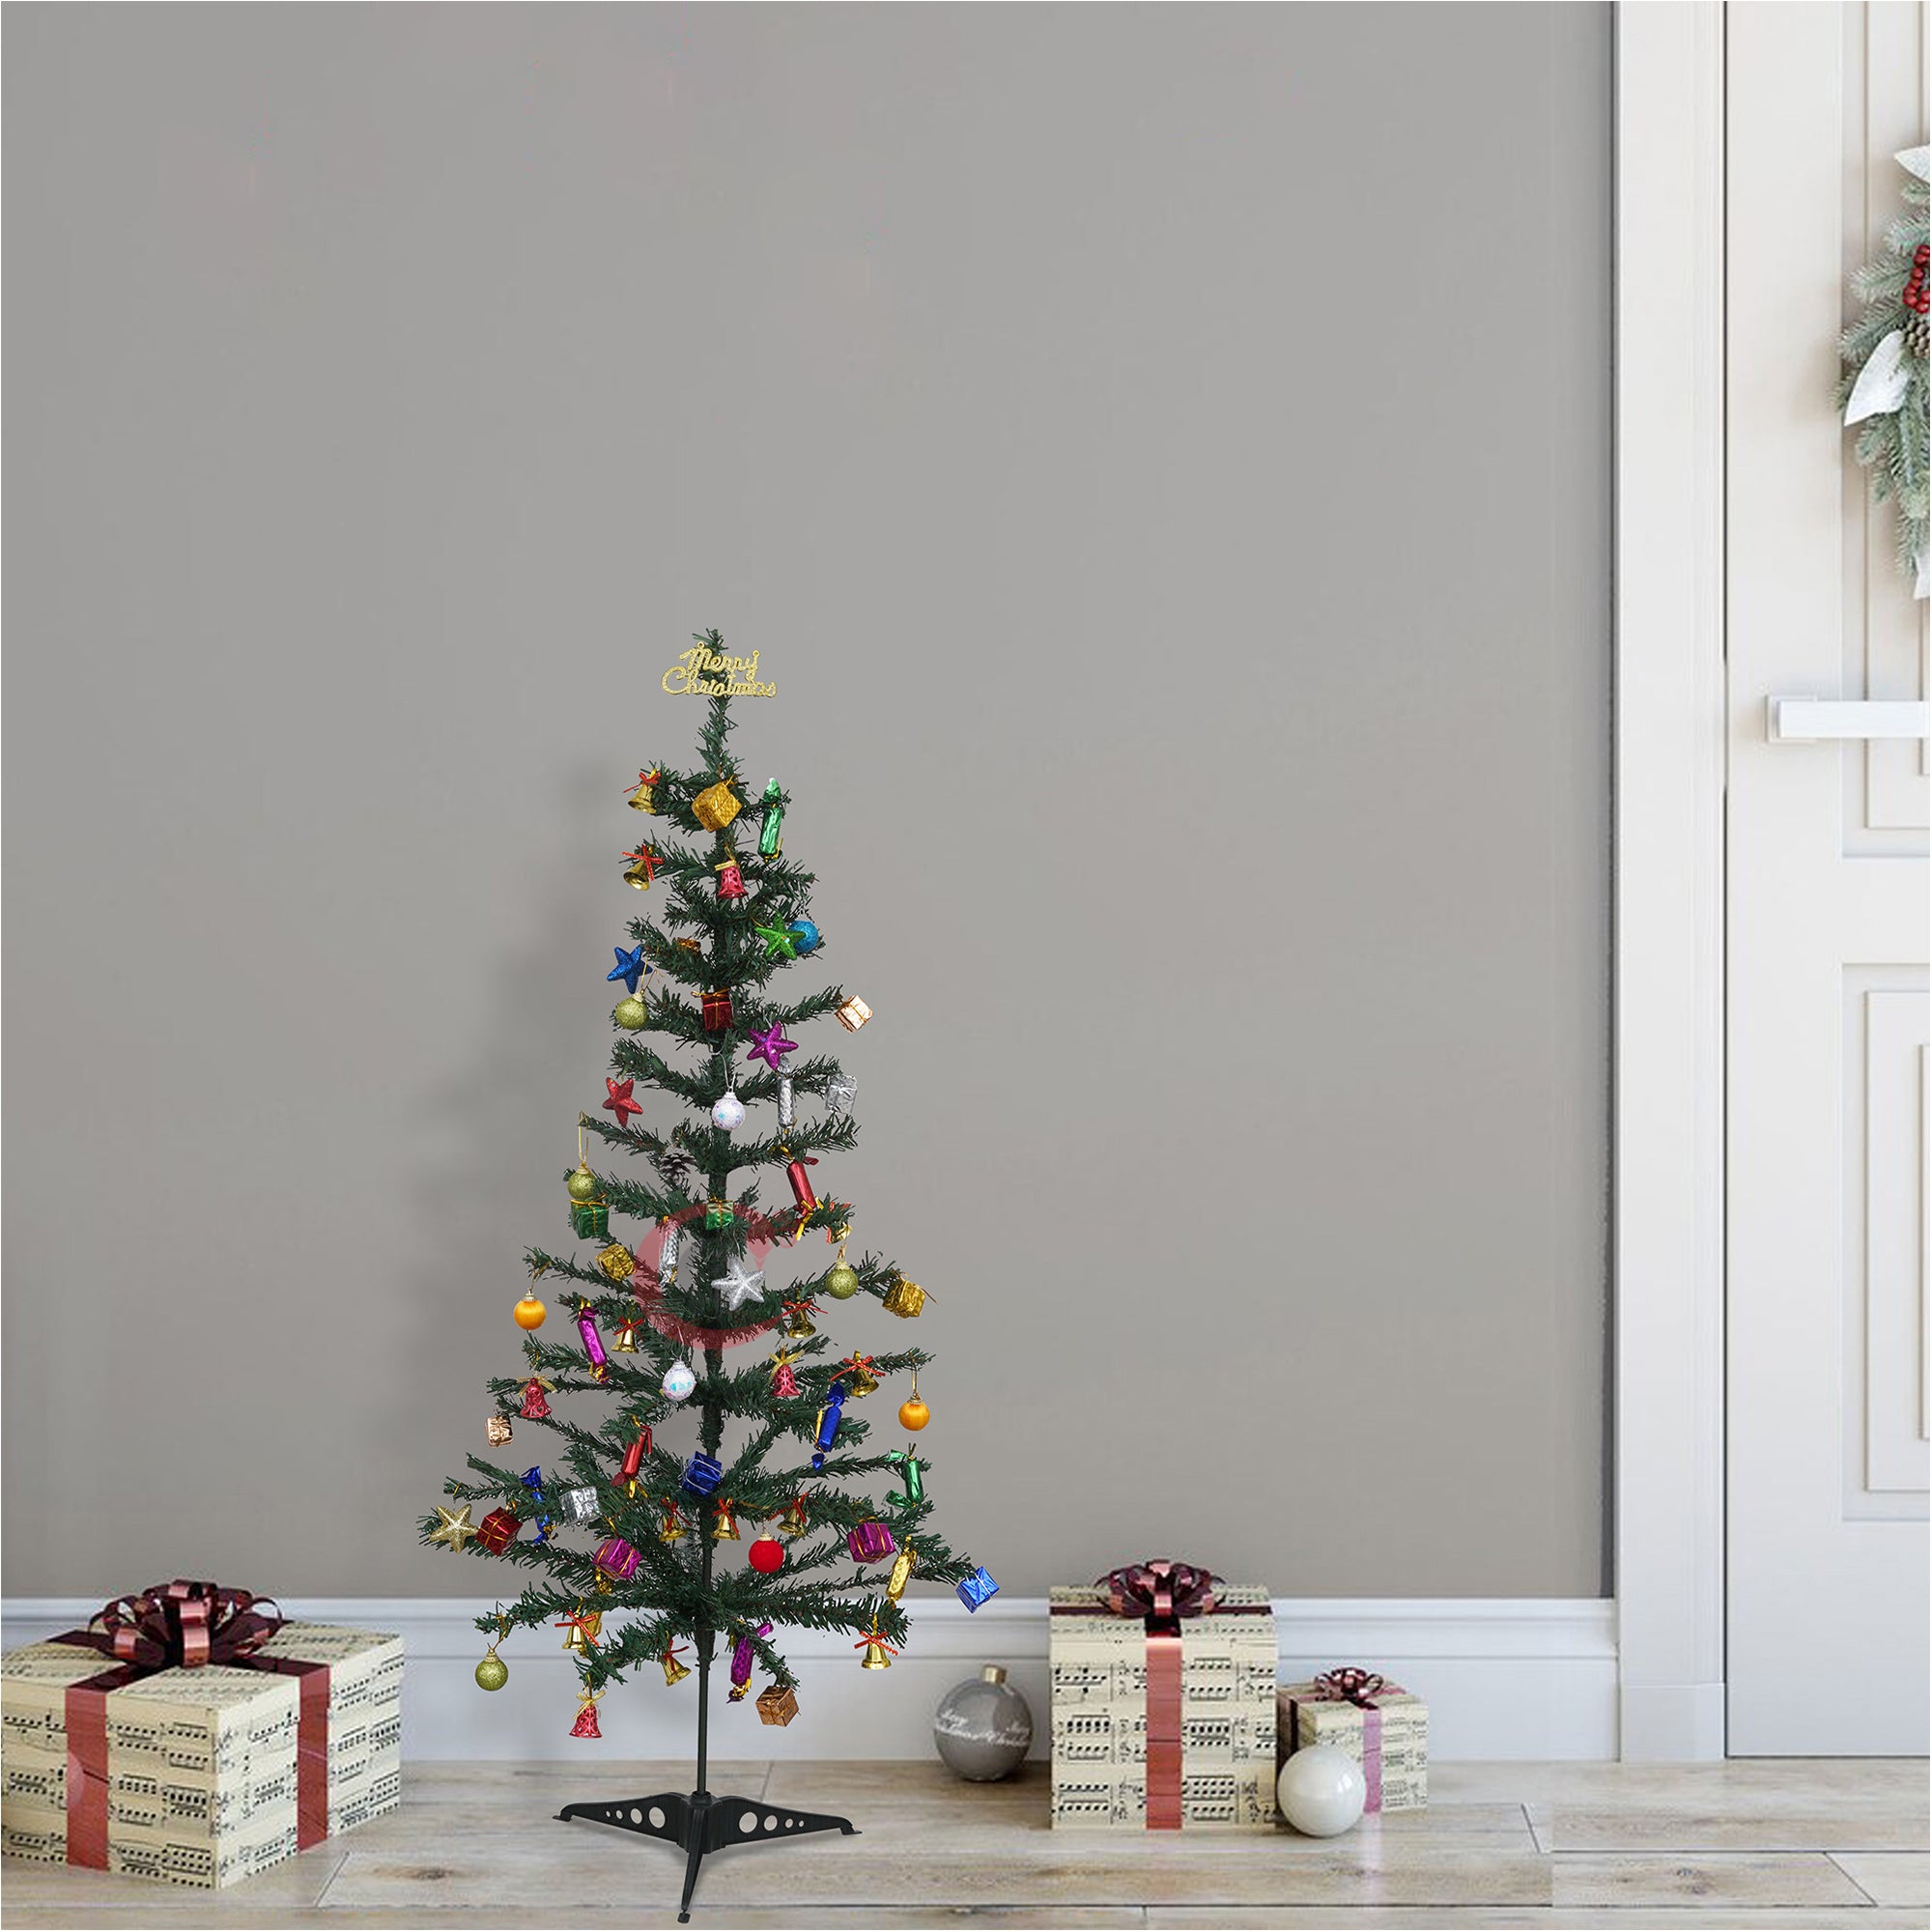 eCraftIndia 3 Feet Green Artificial Christmas Tree Xmas Pine Tree with Stand and 60 Christmas Decoration Ornaments Props - Merry Christmas Decoration Item for Home, Office, and Church